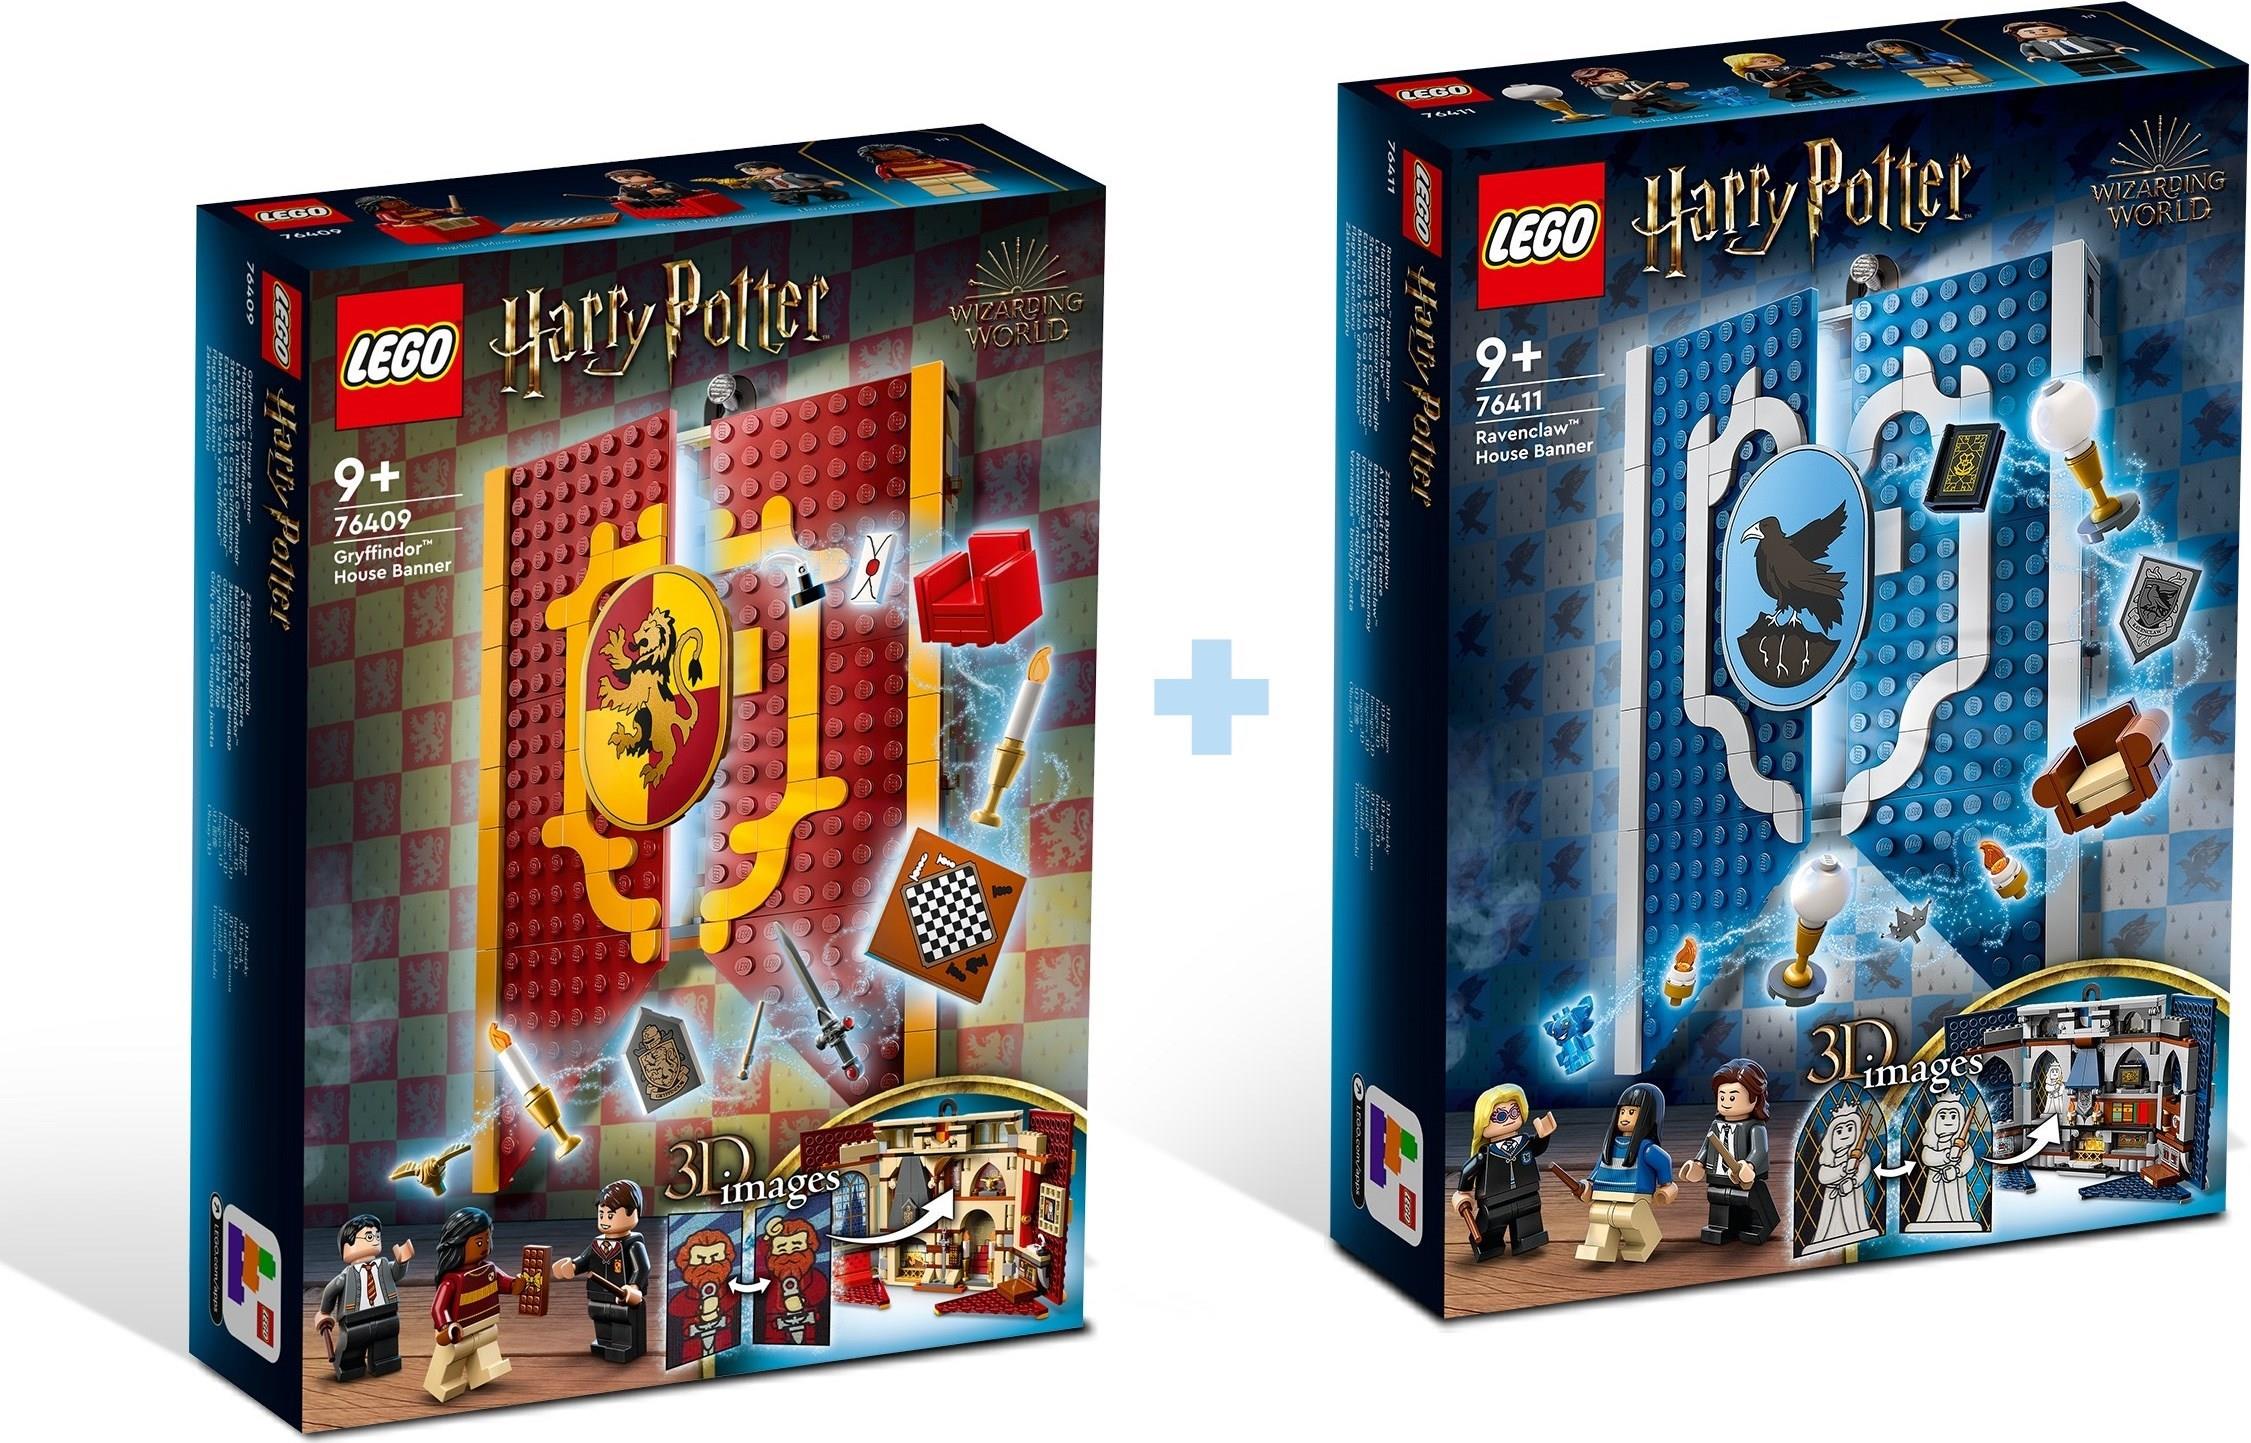 LEGO 76411 Ravenclaw House Banner review